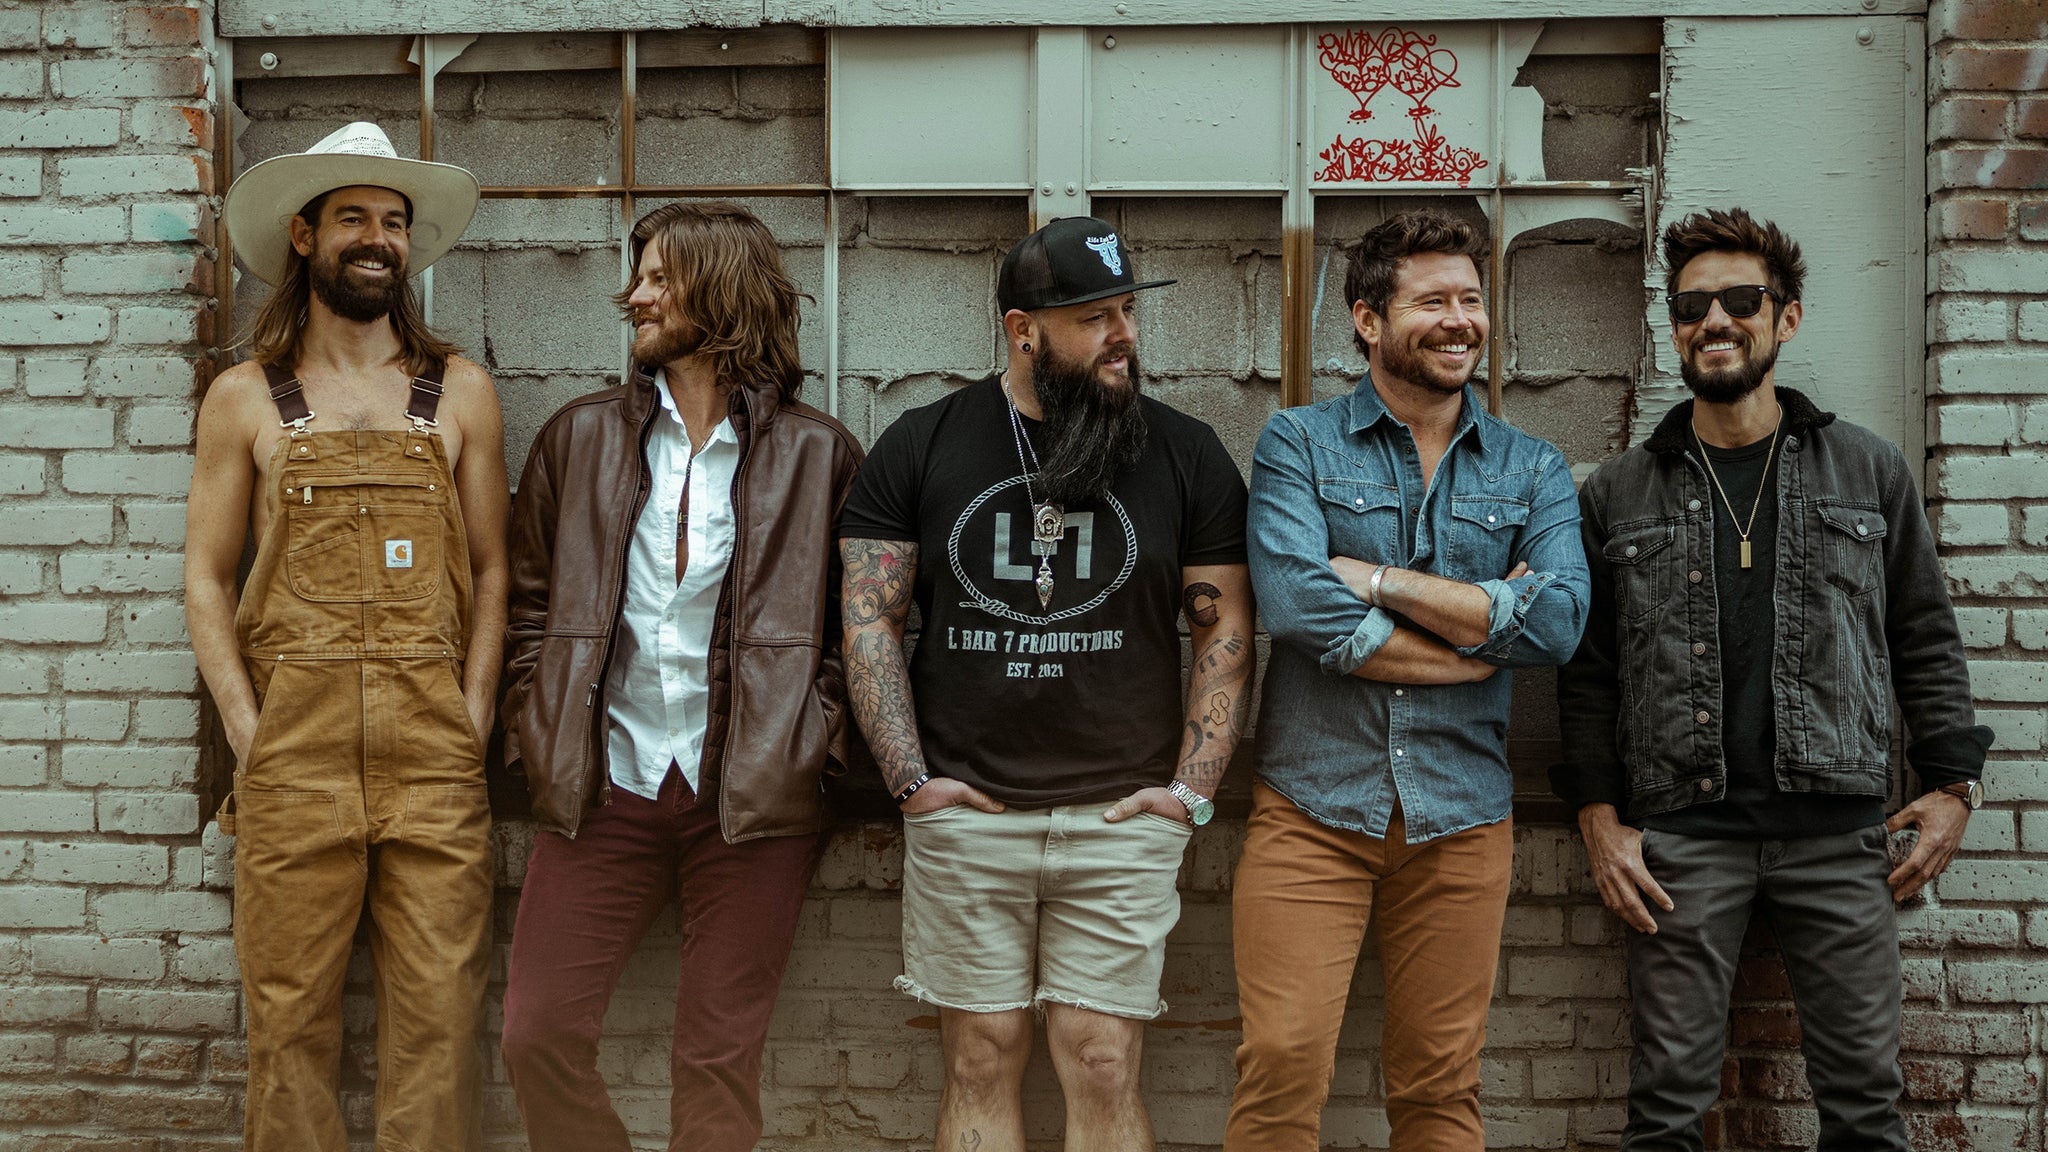 Shane Smith and the Saints in Charlottesville promo photo for Local presale offer code